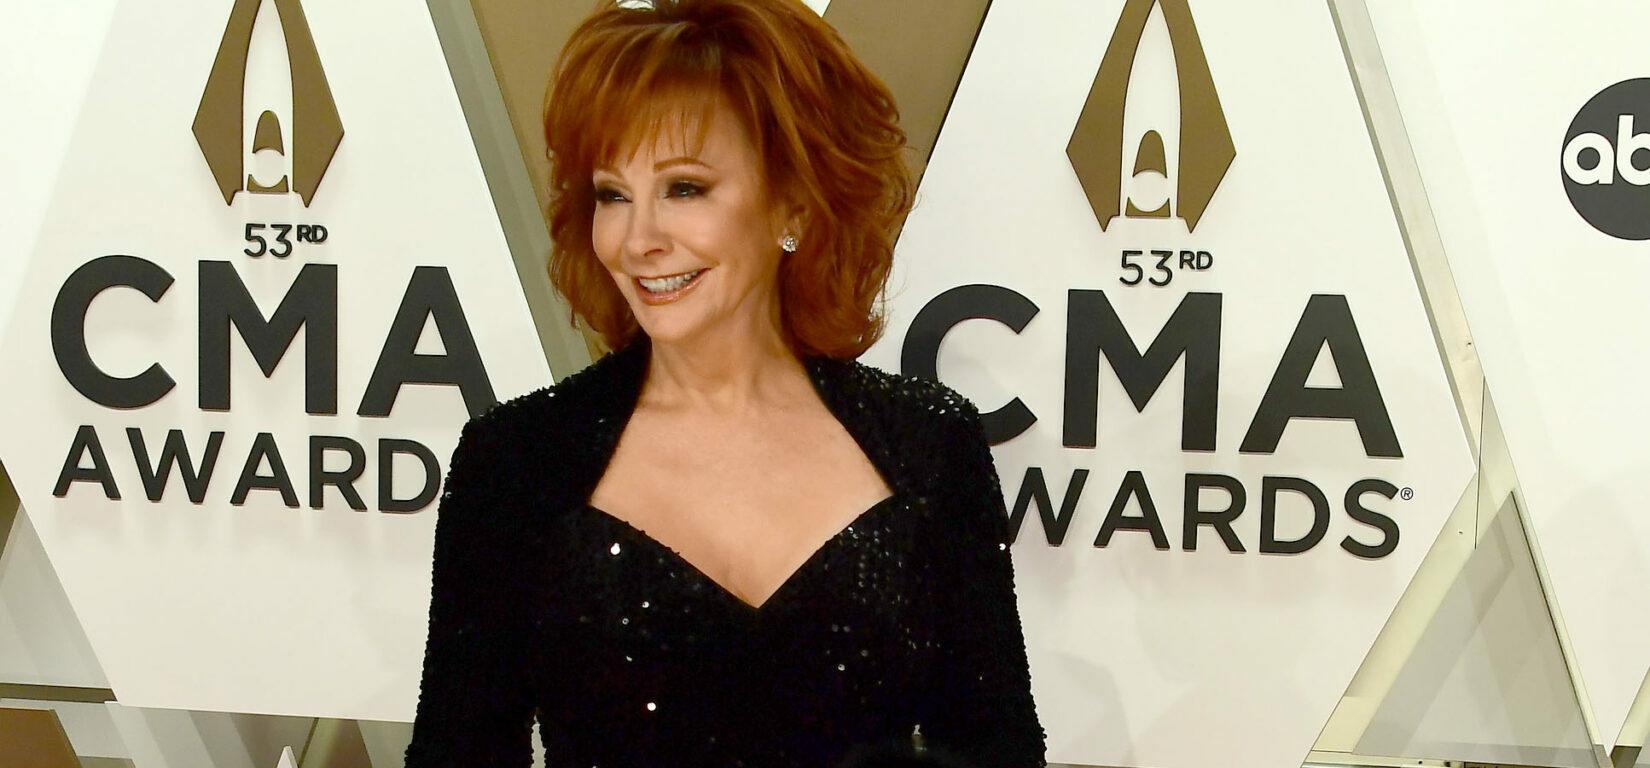 Reba McEntire Rescued From Collapsing Building By Oklahoma Fire Department